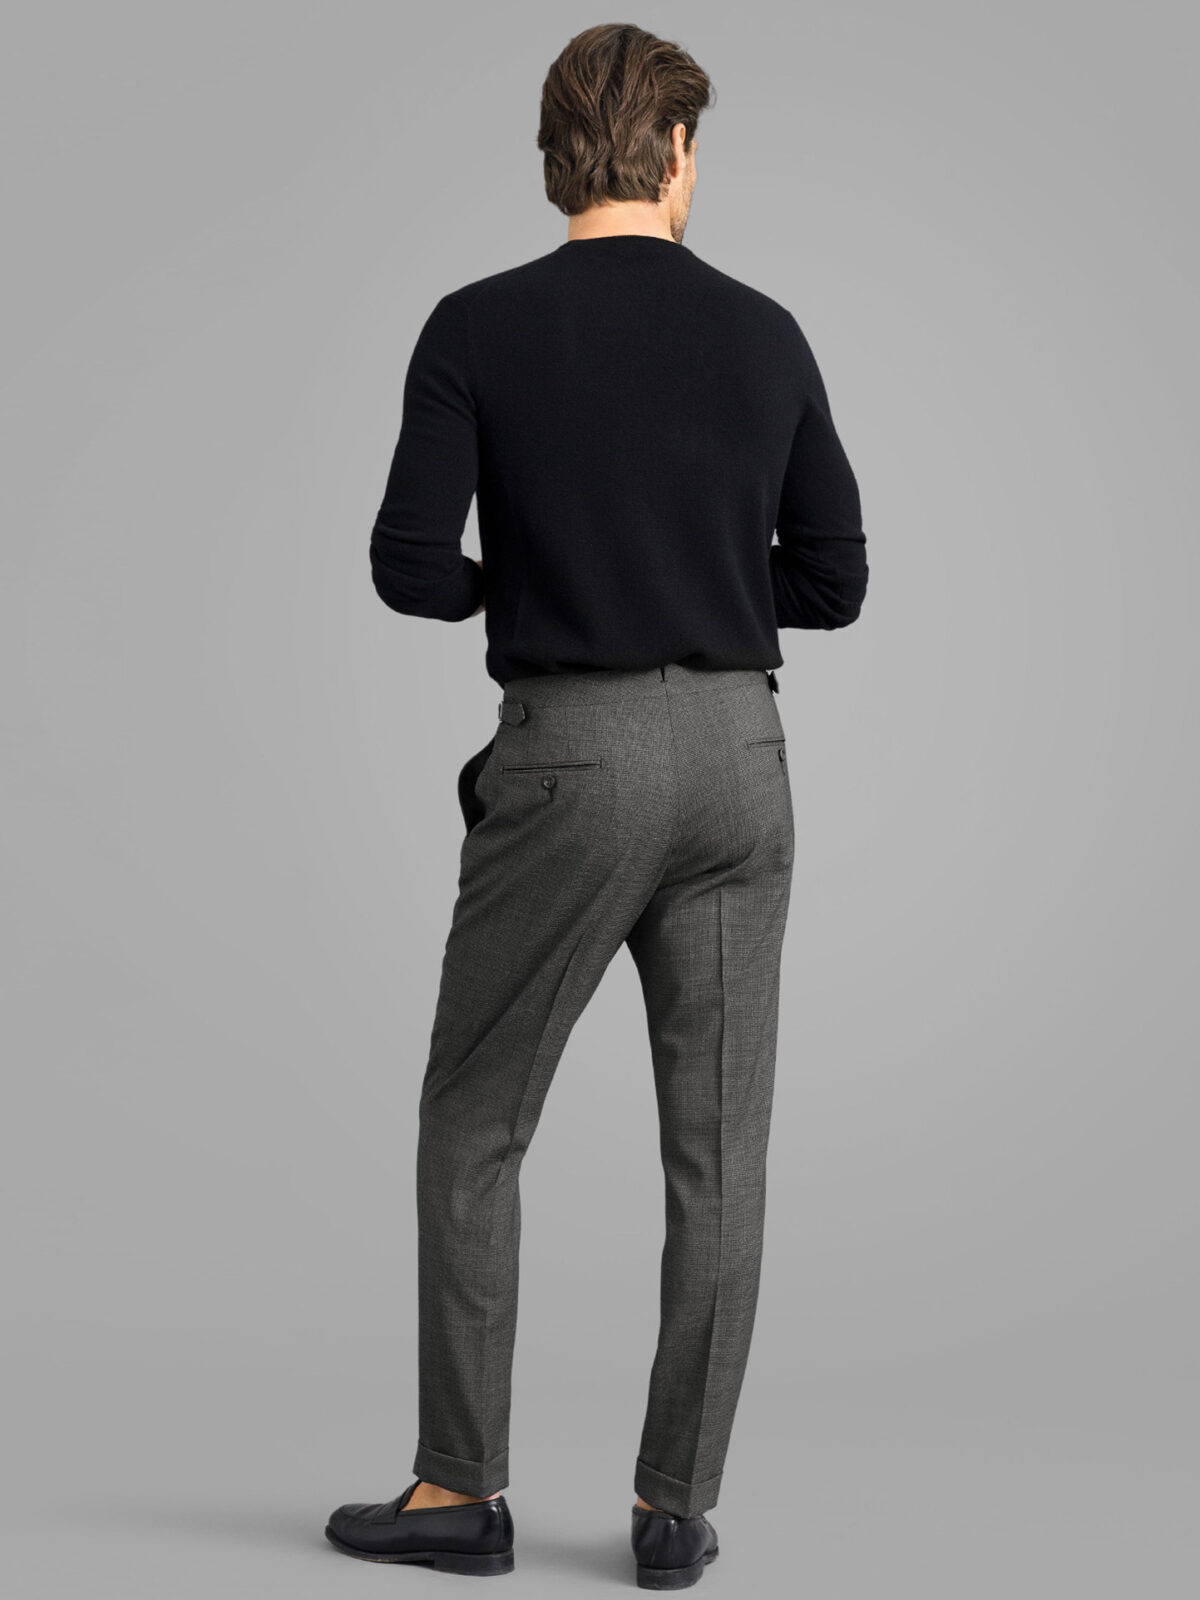 Narrow Bottom Track Trousers - Buy Narrow Bottom Track Trousers online in  India